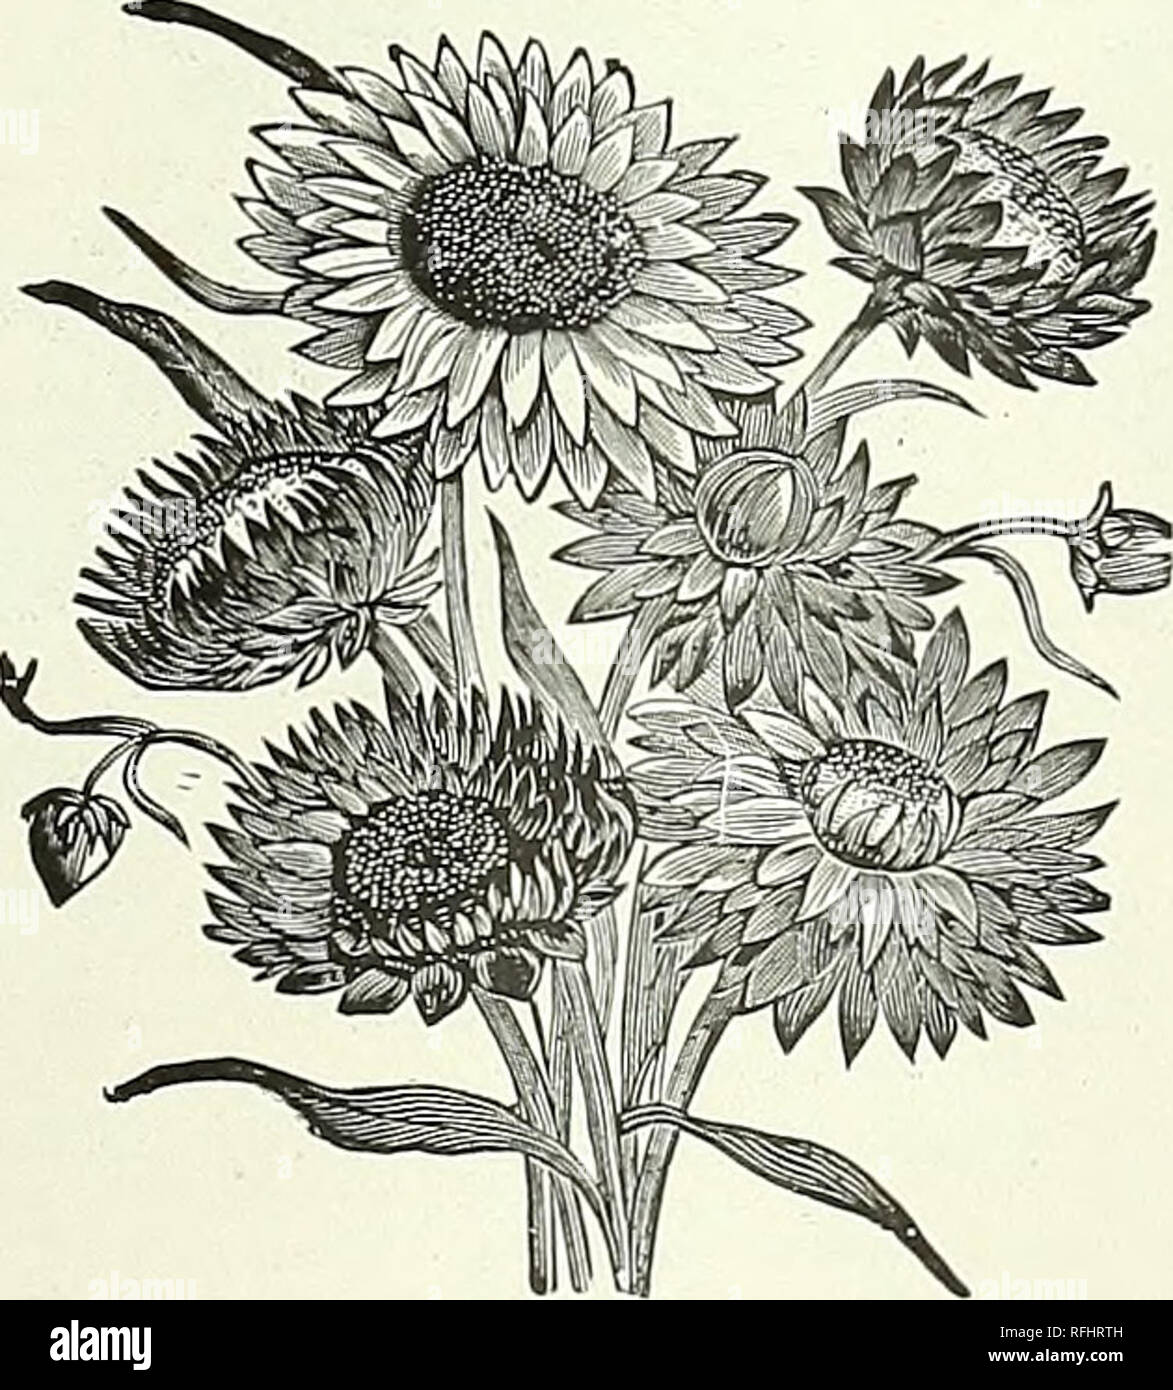 . Importers growers and dealers in choice seeds, bulbs and plants, 1900. Nursery stock New York (State) Catalogs; Flowers Seeds Catalogs; Vegetables Seeds Catalogs; Plants, Ornamental Catalogs; Gardening Equipment and supplies Catalogs. GAILLARDIA PICTA LORENZIANA. Double Gaillardia. This is an introduction of the greatest importance, and one which will prove to be of lasting merit. As an ornamental plant, and on account of its long duration of bloom, and its usefulness for cut flowers, it can- not be too highly recommended. Per pkt., 5c. HYBRID GAILLARDIAS. Exceedingly showy flowers, blooming Stock Photo